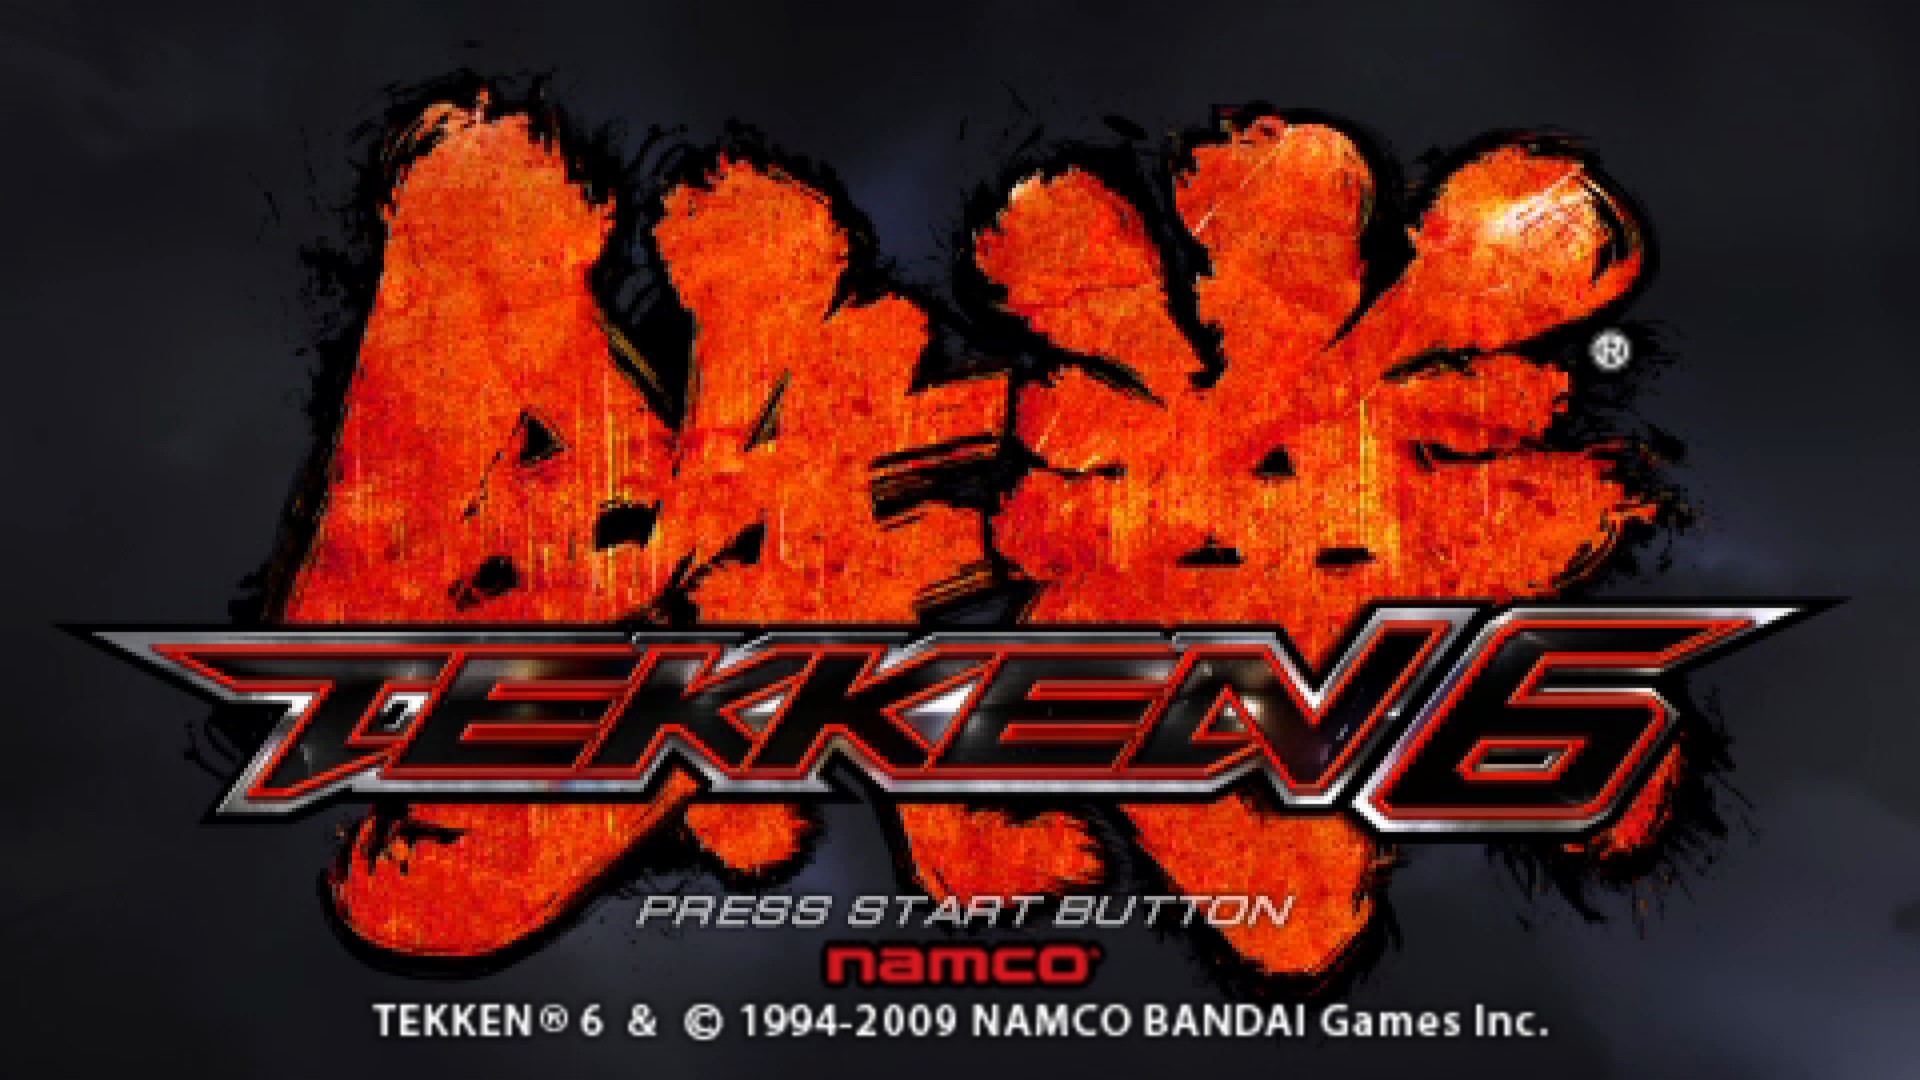 How to download tekken 6 for ppsspp android